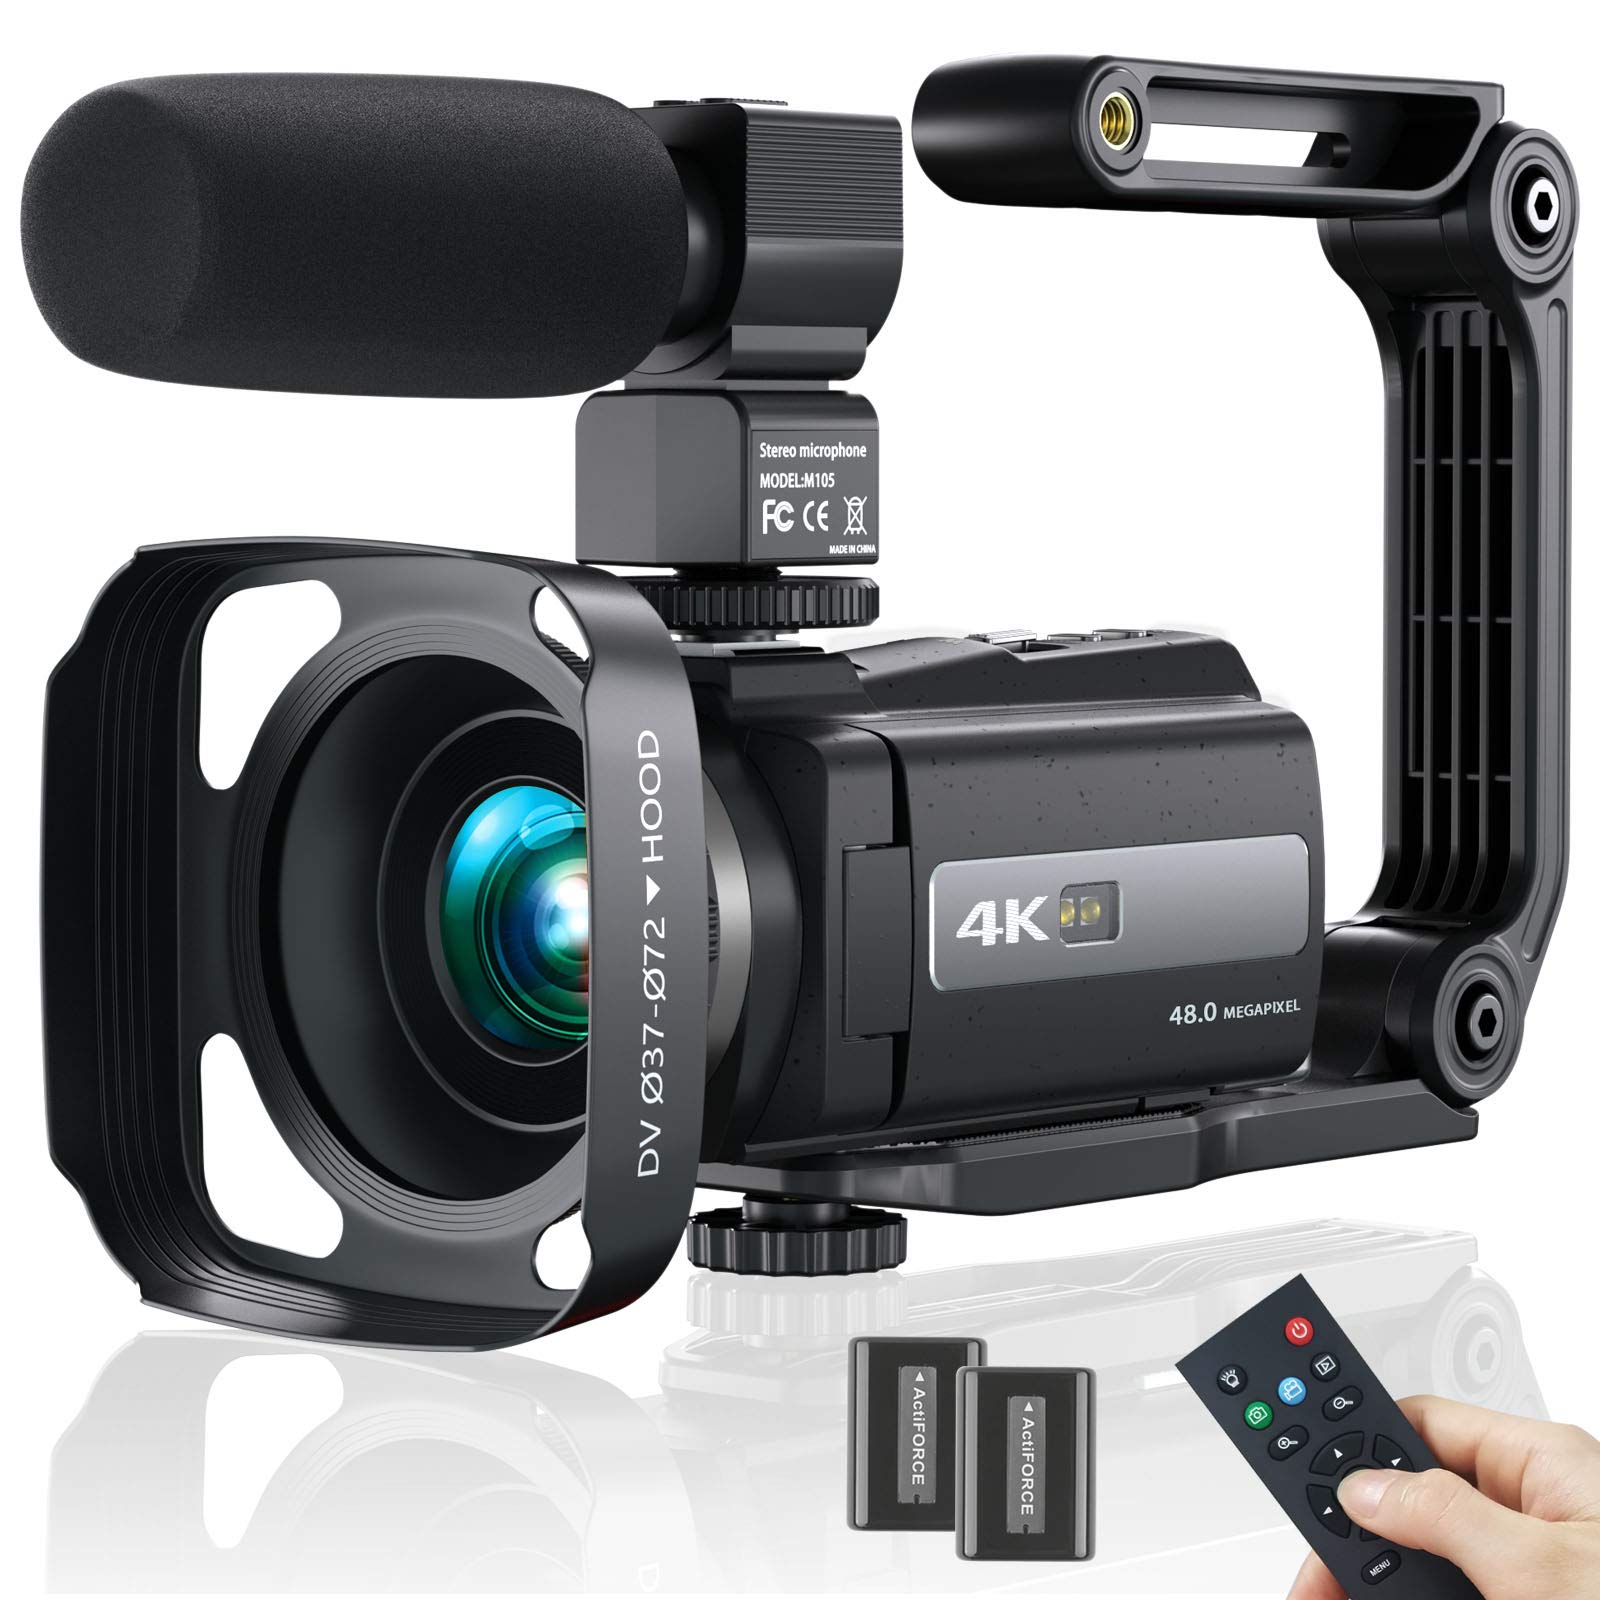 2021 New Upgraded Video Camera Camcorder, 4K WiFi Ultra HD 48MP Vlogging Recorder with IPS Touch Screen, IR Night Vision Digital Camcorder with Stabilizer, Mic, Remote Control, Lens Hood, 2 Batteries